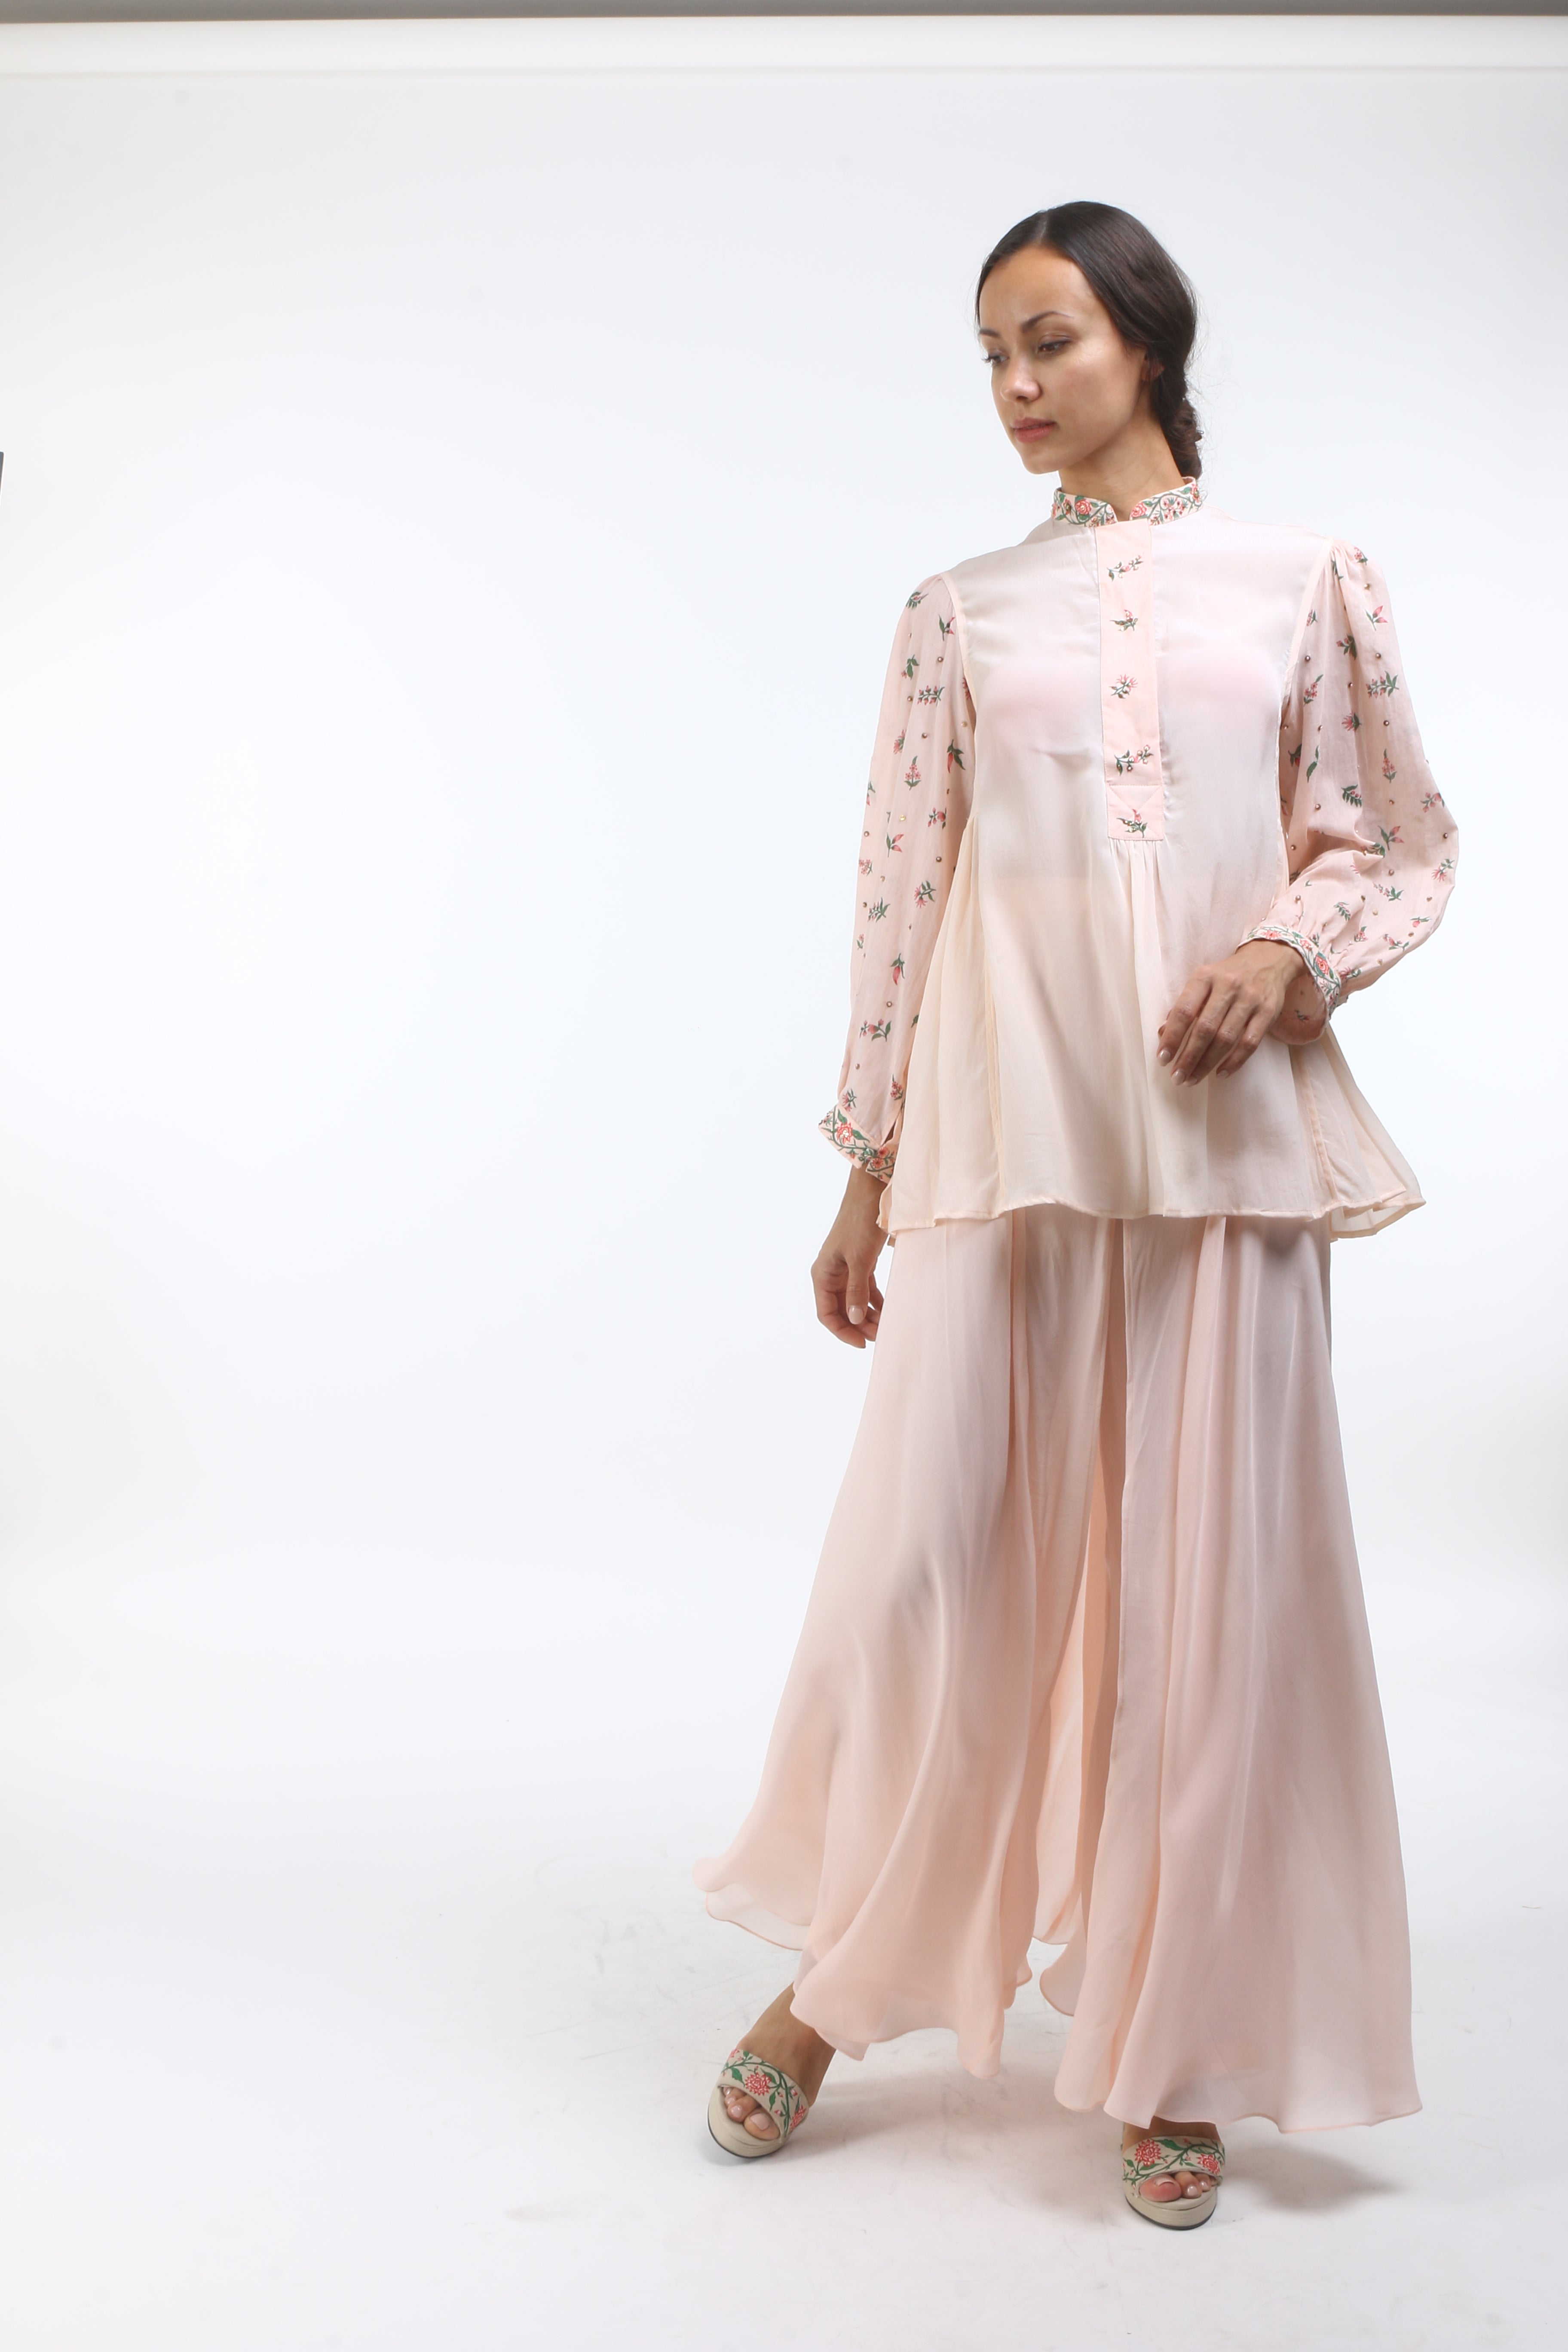 Bloom salmon pink bouquet and Mumtaz bel printed side gathered top in crepe.